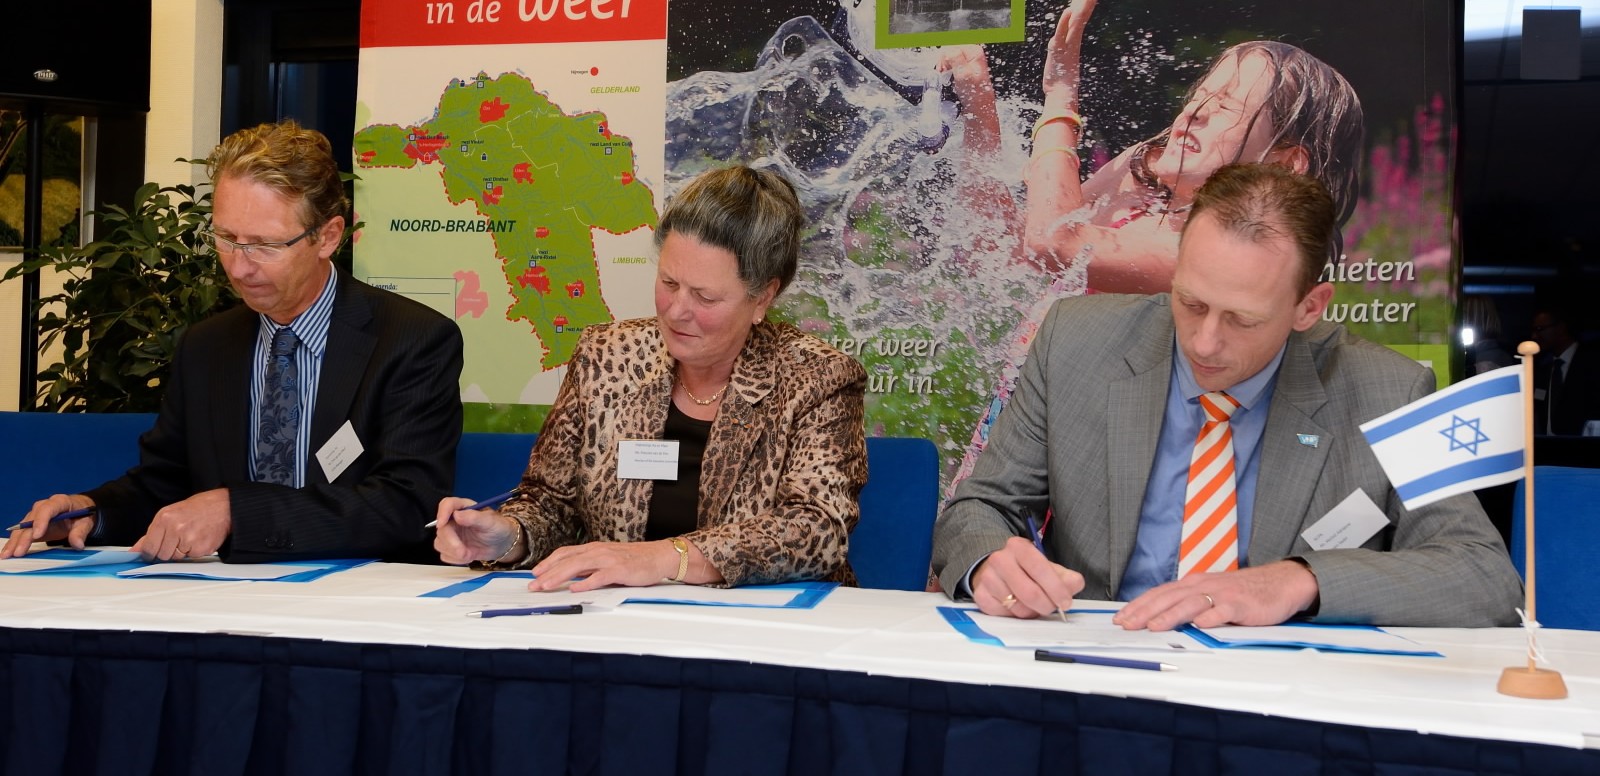 Erik van der Werf, from Holland's Ministry of Economics, Francien van de Ven, member of Aa and Maas executive board, and Michiel Adriaanse, from the Competence Center of Paper and Board, sign a collaboration agreement.